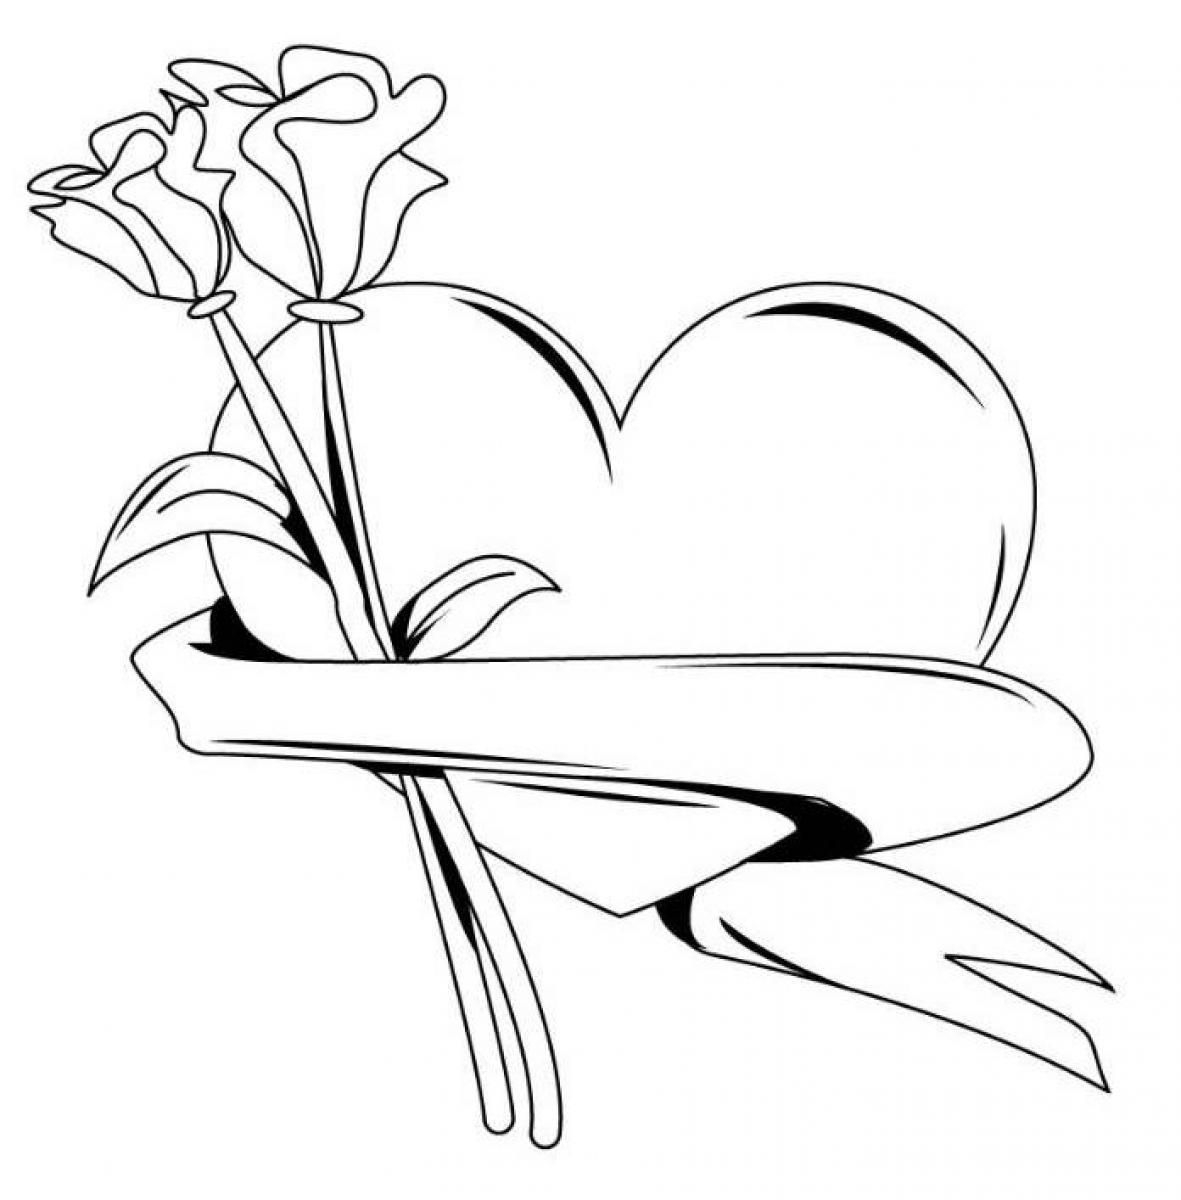 Roses And Hearts Coloring Pages Coloring Arts Hearts And Roses Coloring Pages Home Freef Heart